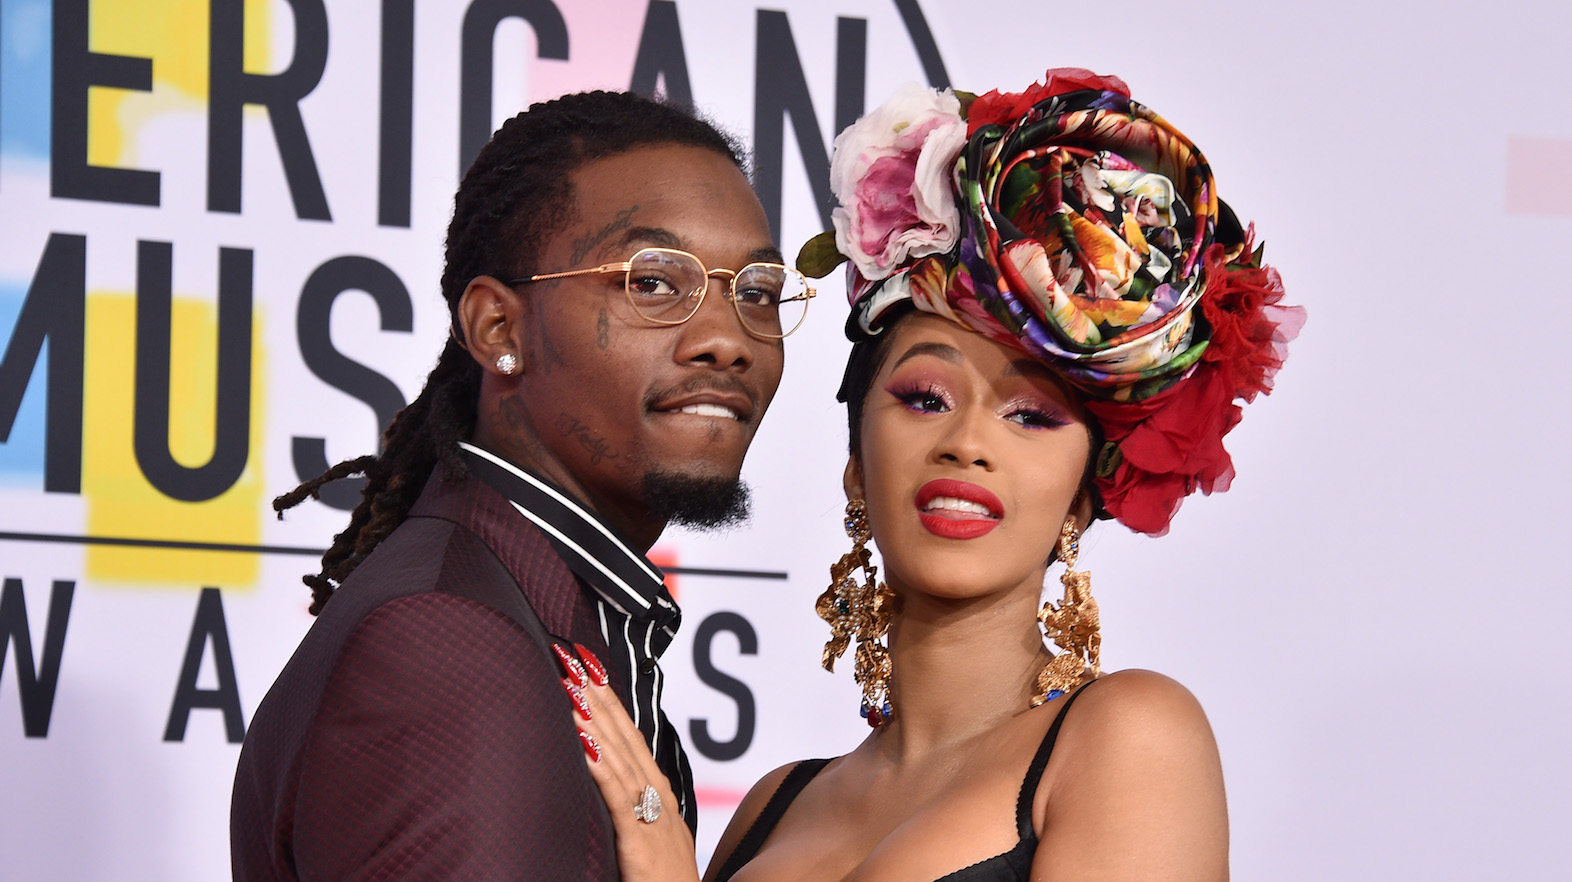 Why Did Cardi B And Offset Break Up? Find Out The Reason Here